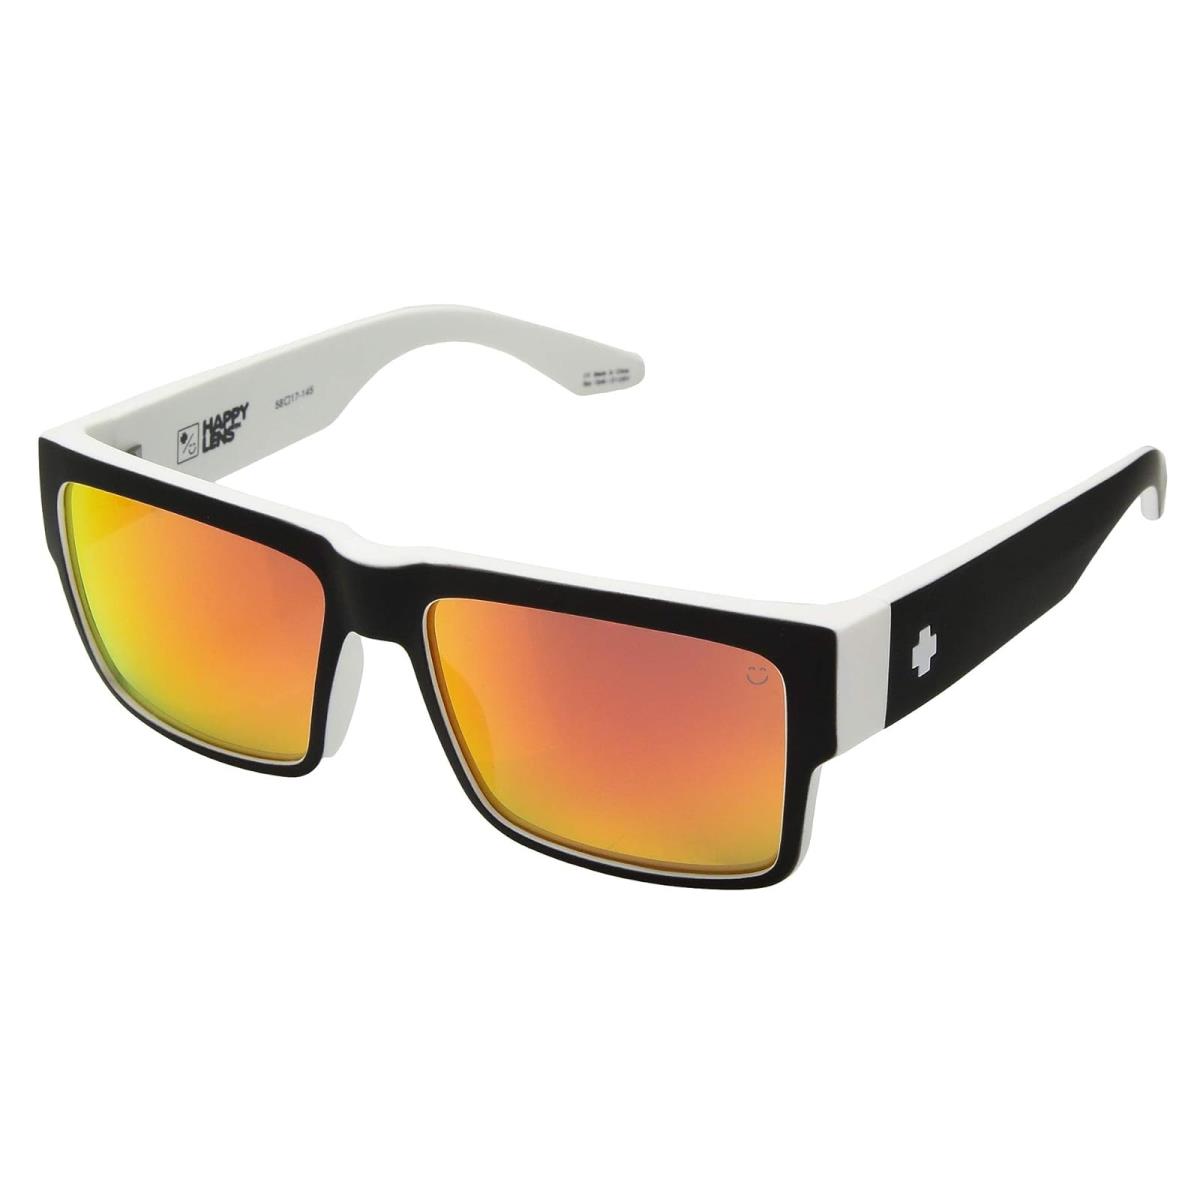 Unisex Sunglasses Spy Optic Cyrus Cyrus Whitewall - HD Plus Gray Green With Red Spectra Mirror